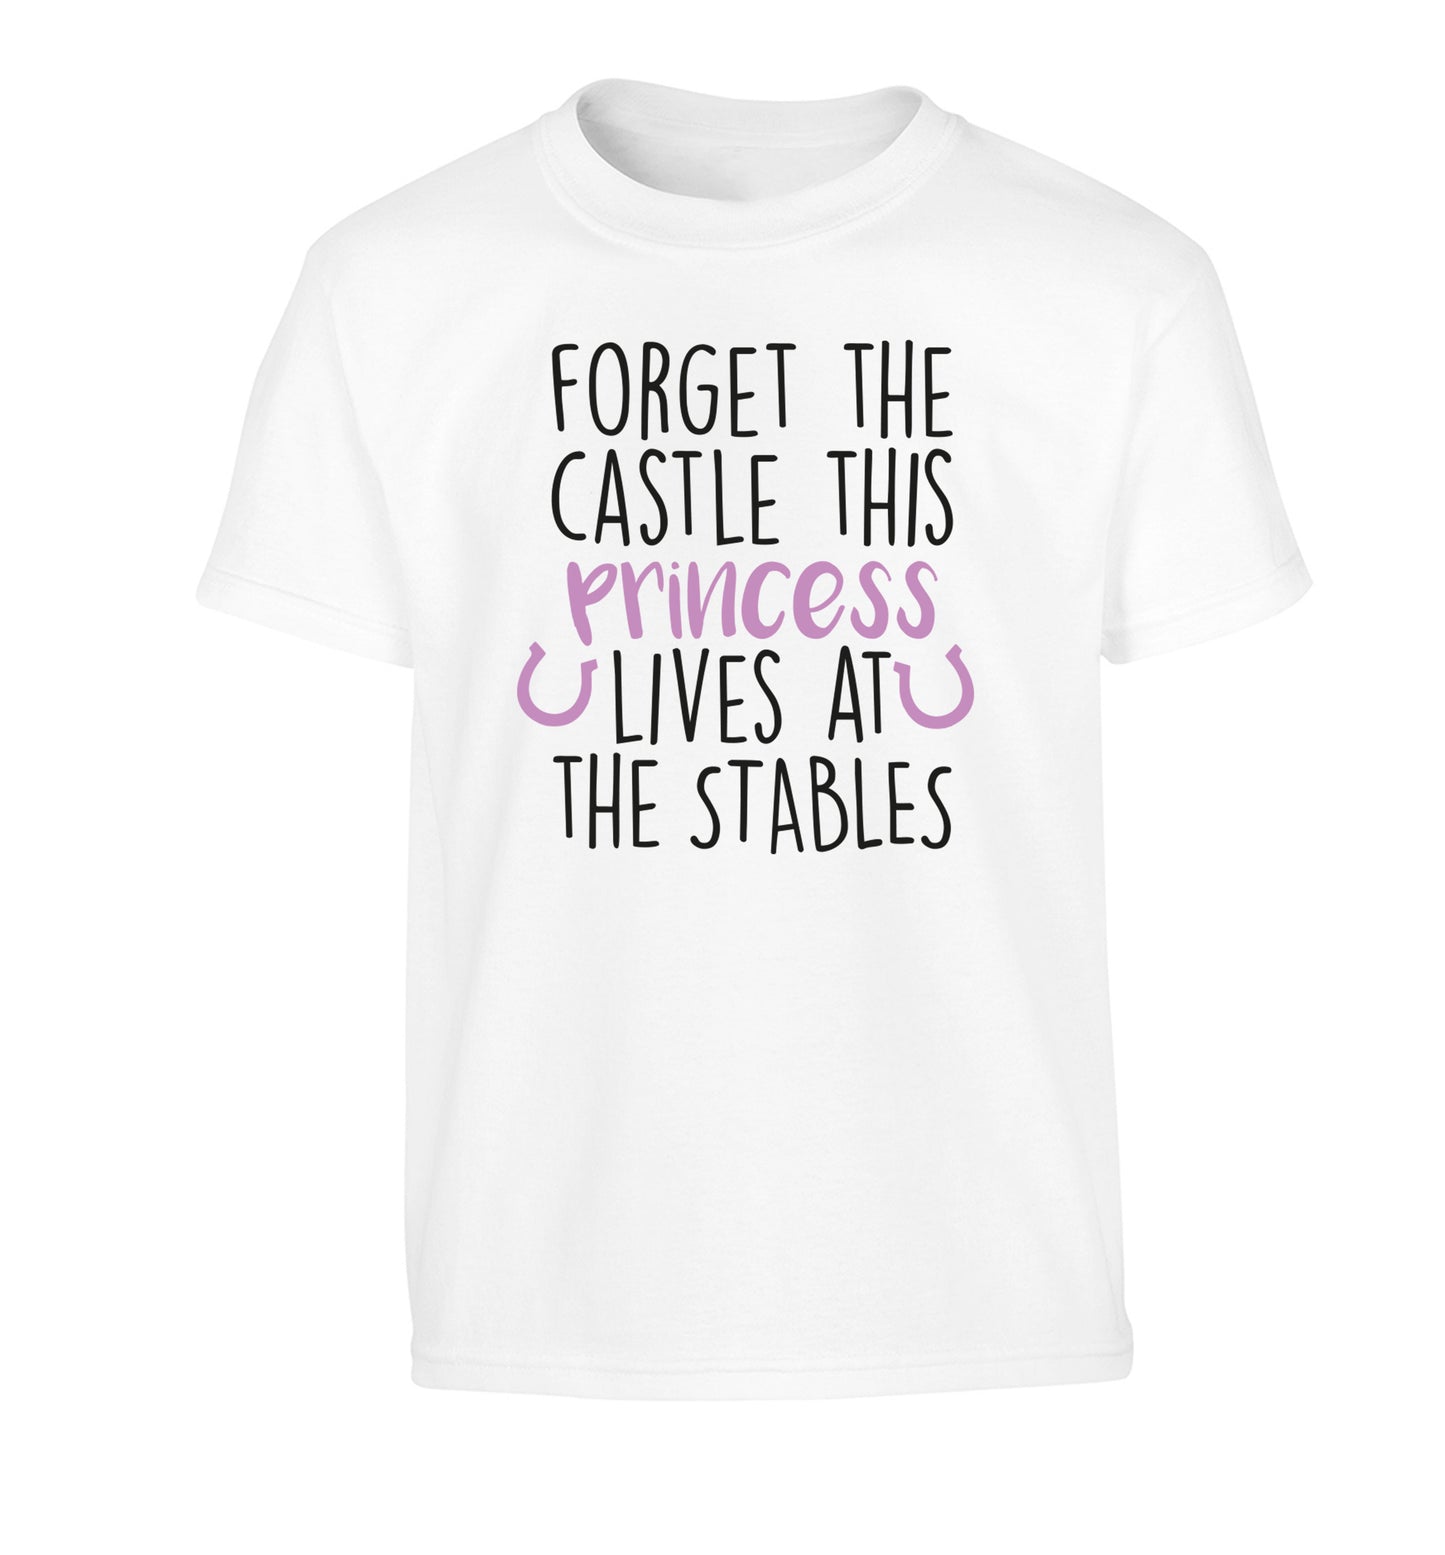 Forget the castle this princess lives at the stables Children's white Tshirt 12-14 Years